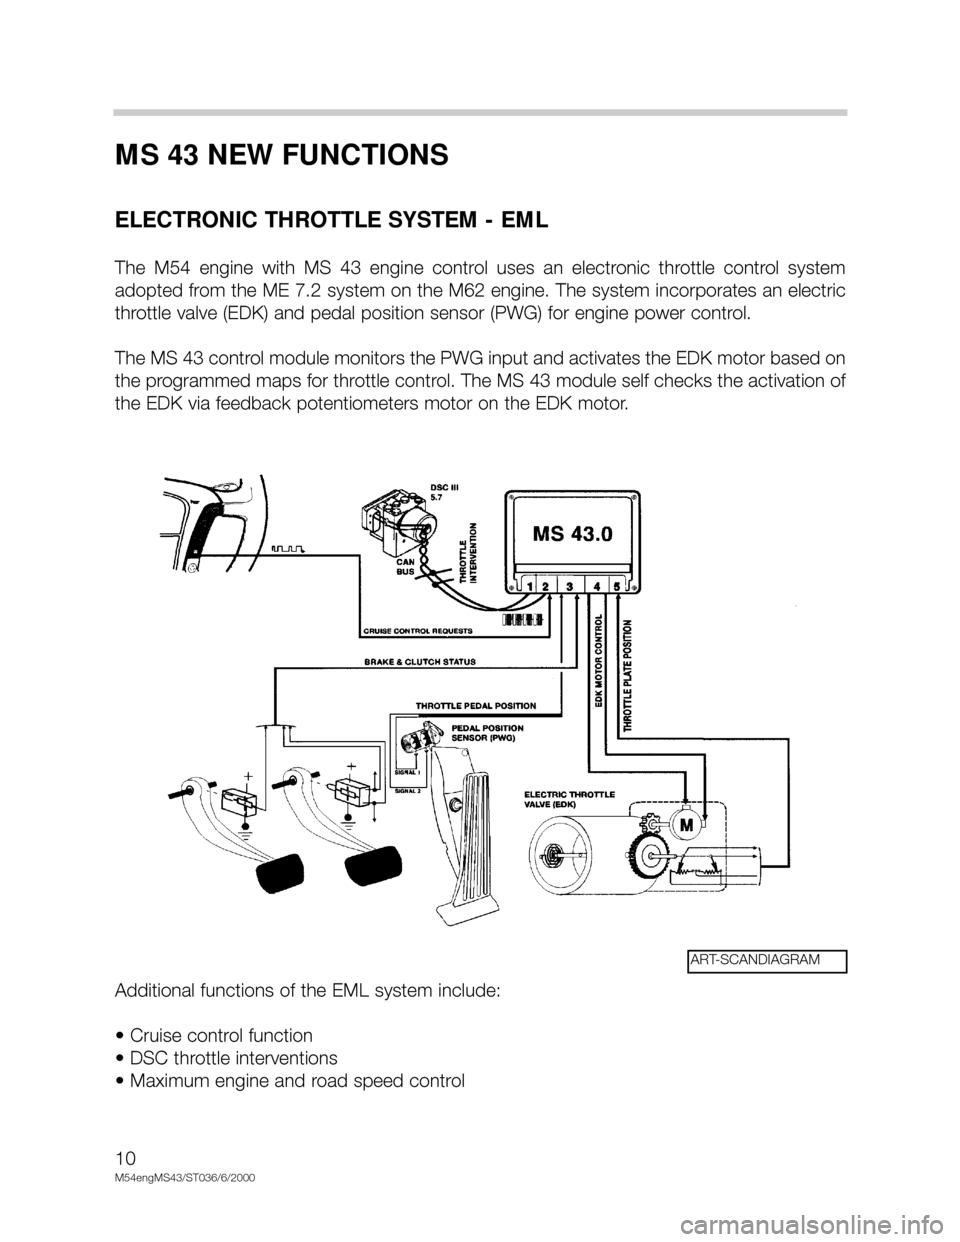 BMW X5 2000 E53 M54 Engine Workshop Manual 10
M54engMS43/ST036/6/2000
MS 43 NEW FUNCTIONS
ELECTRONIC THROTTLE SYSTEM - EML
The  M54  engine  with  MS  43  engine  control  uses  an  electronic  throttle  control  system
adopted from the ME 7.2